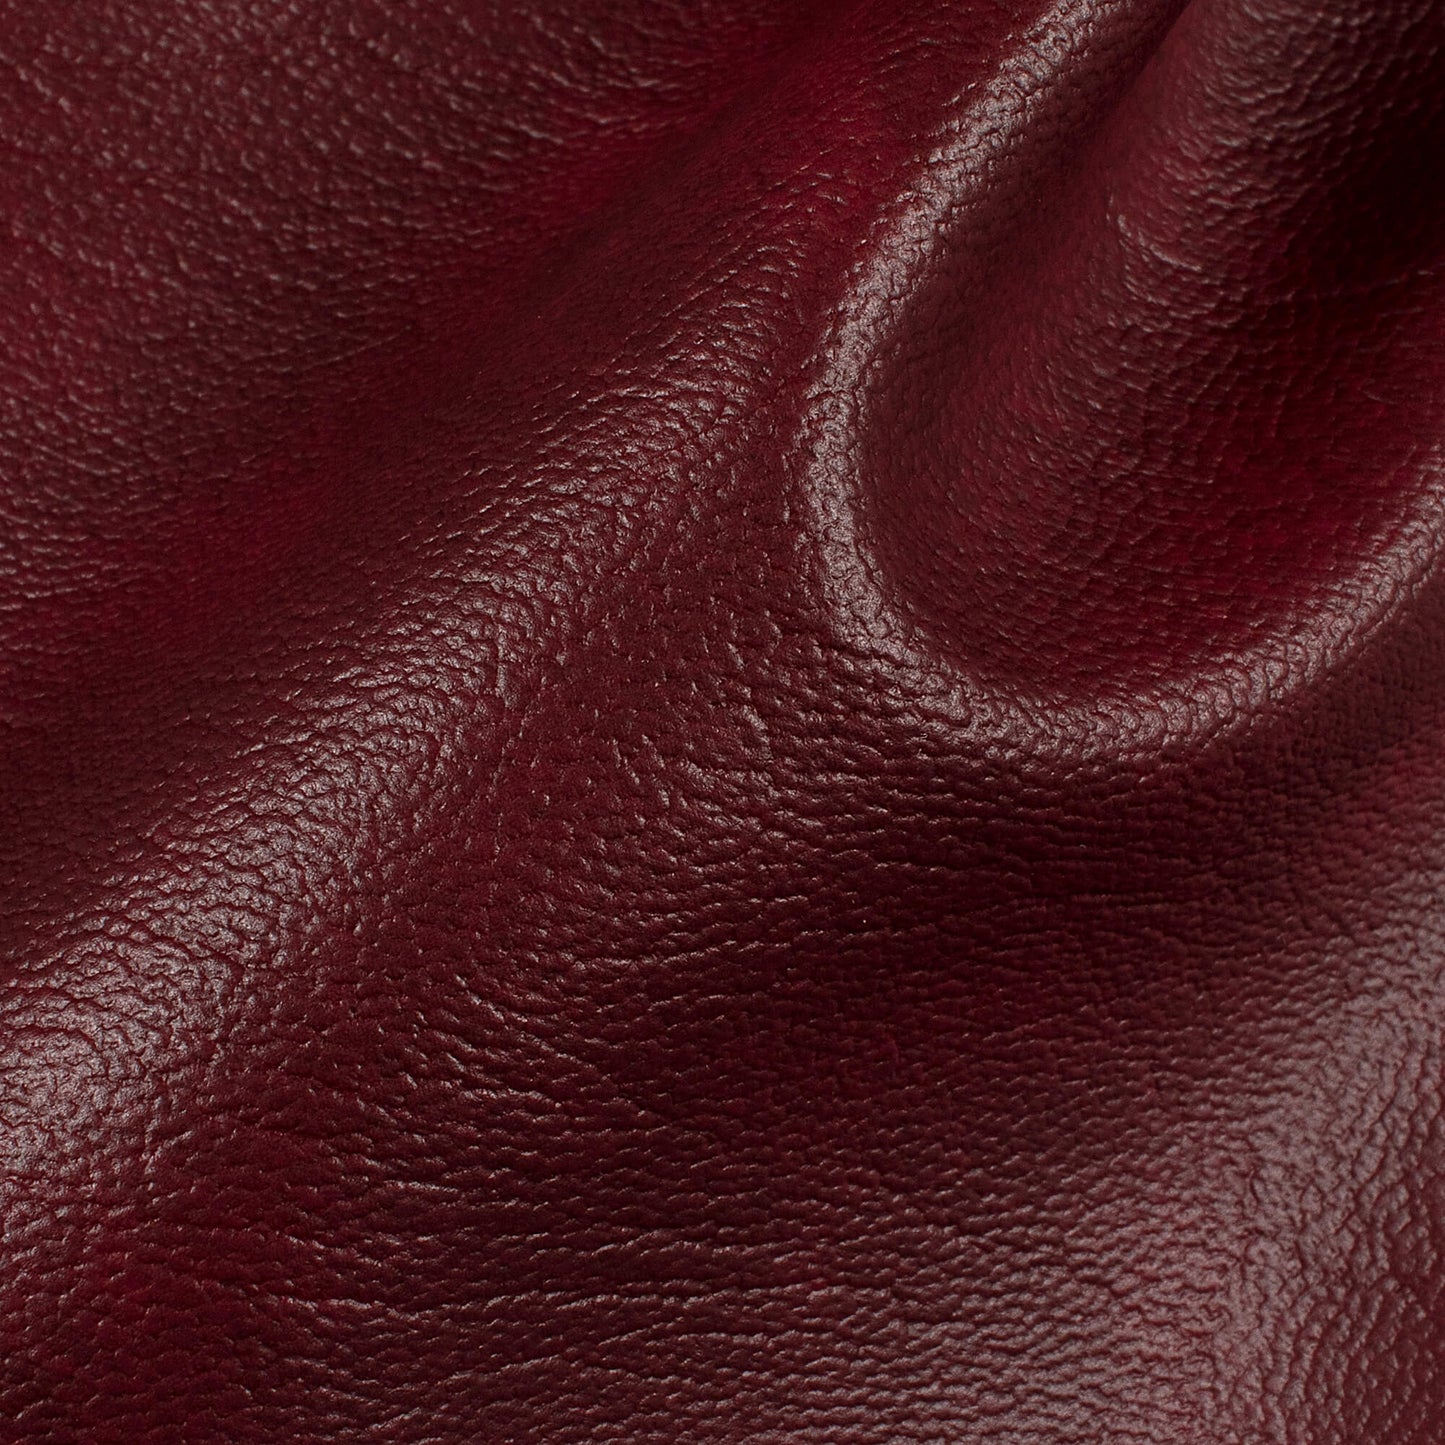 Mahogany Red Self Textured Exclusive Sofa Fabric (Width 54 Inches)